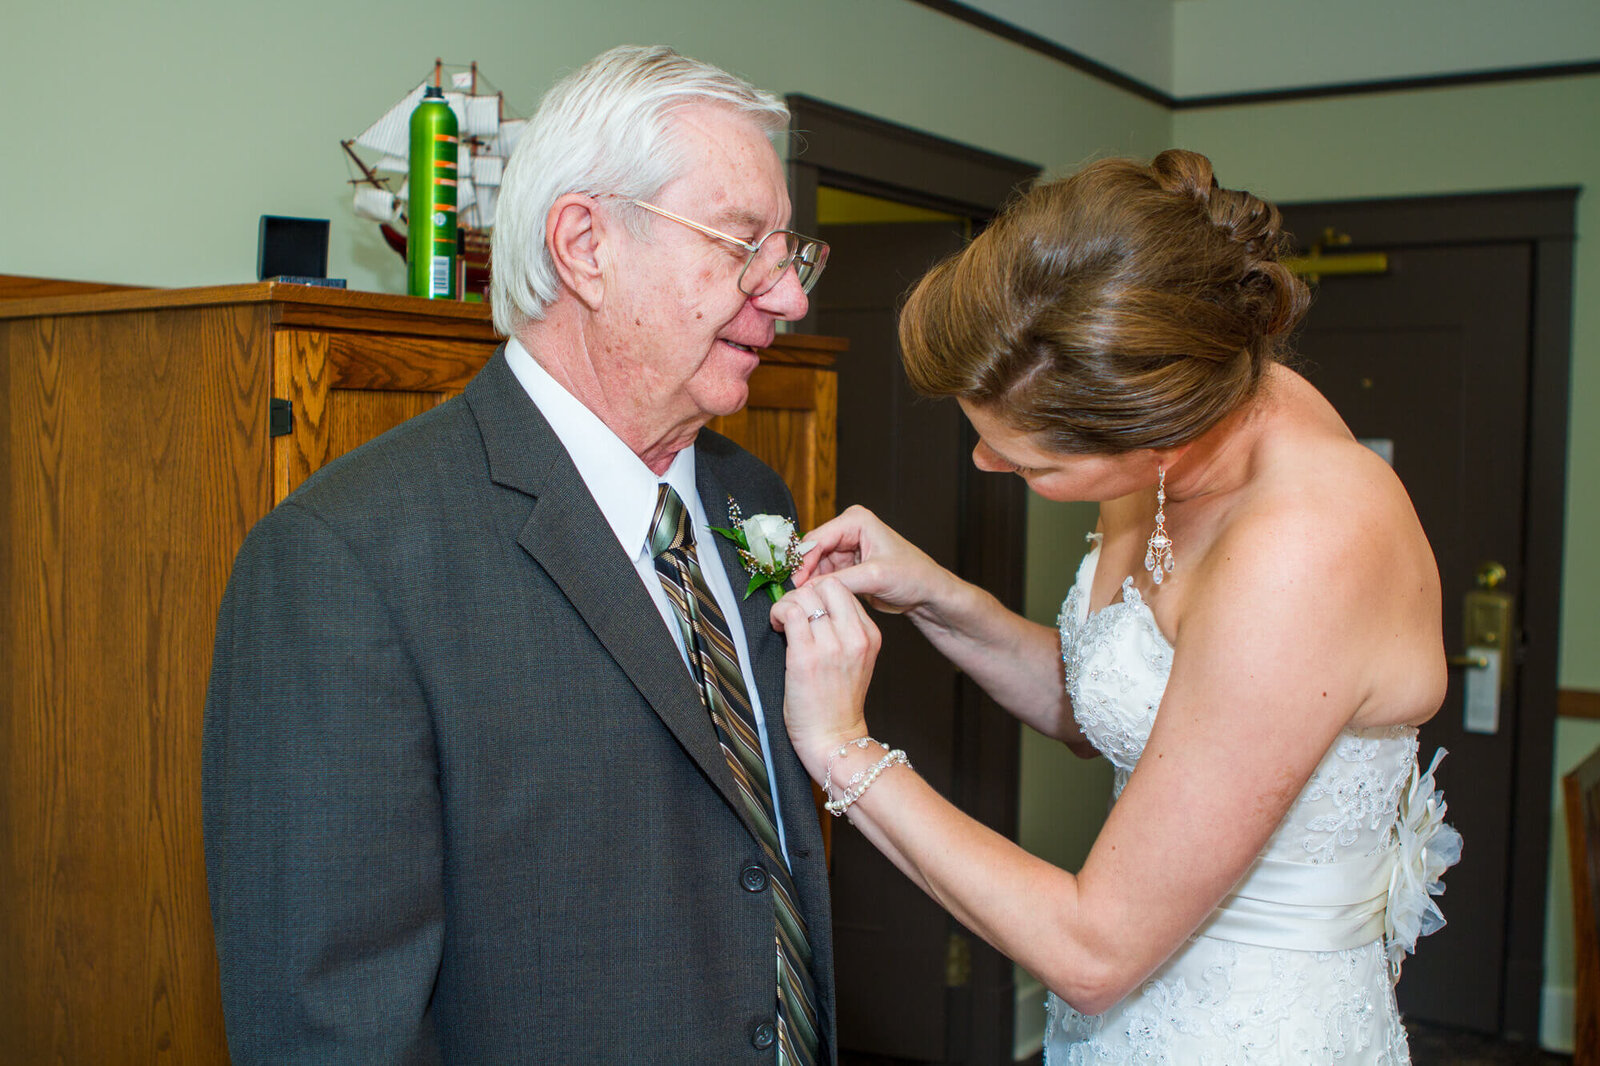 Bride helping father with corsage